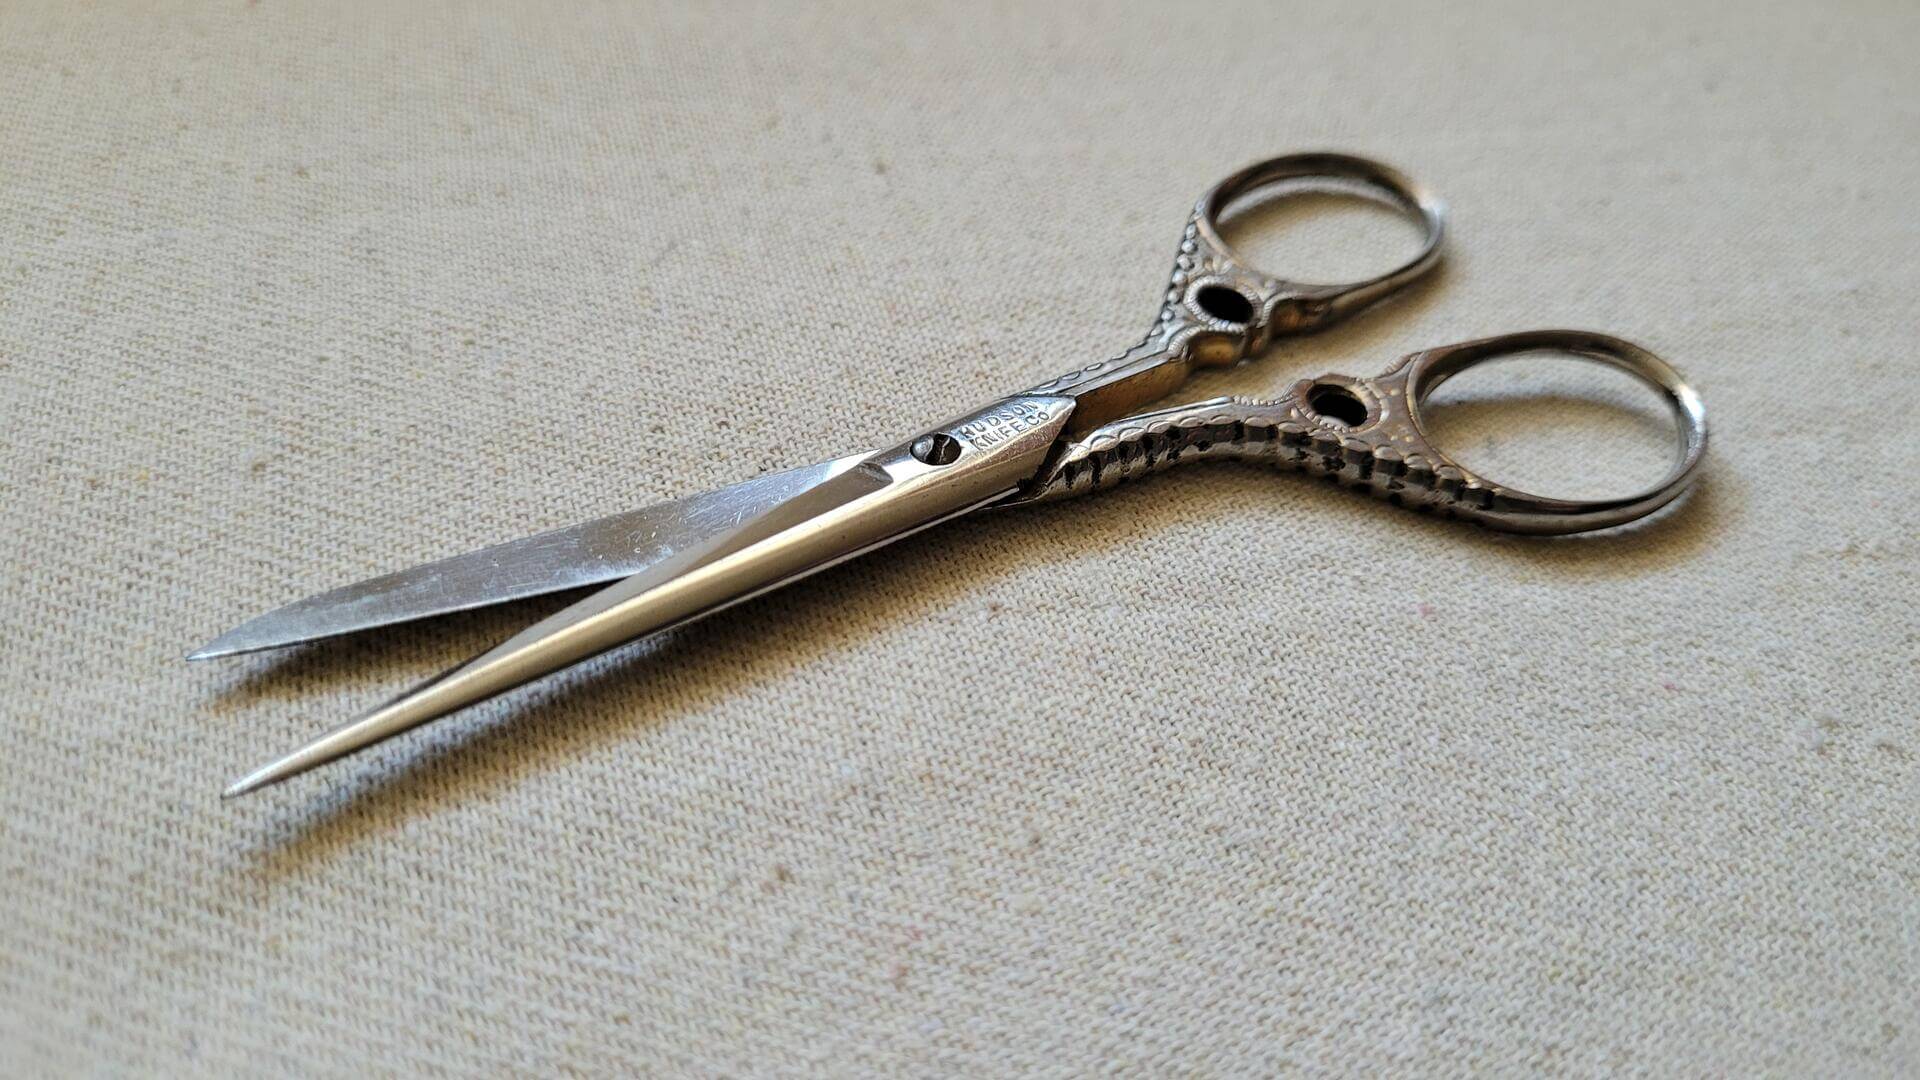 Antique Hudson Knife Co. scissors 4.5 inch long. Vinage made in Germany sewing and cutting tool with beautiful ornamental design